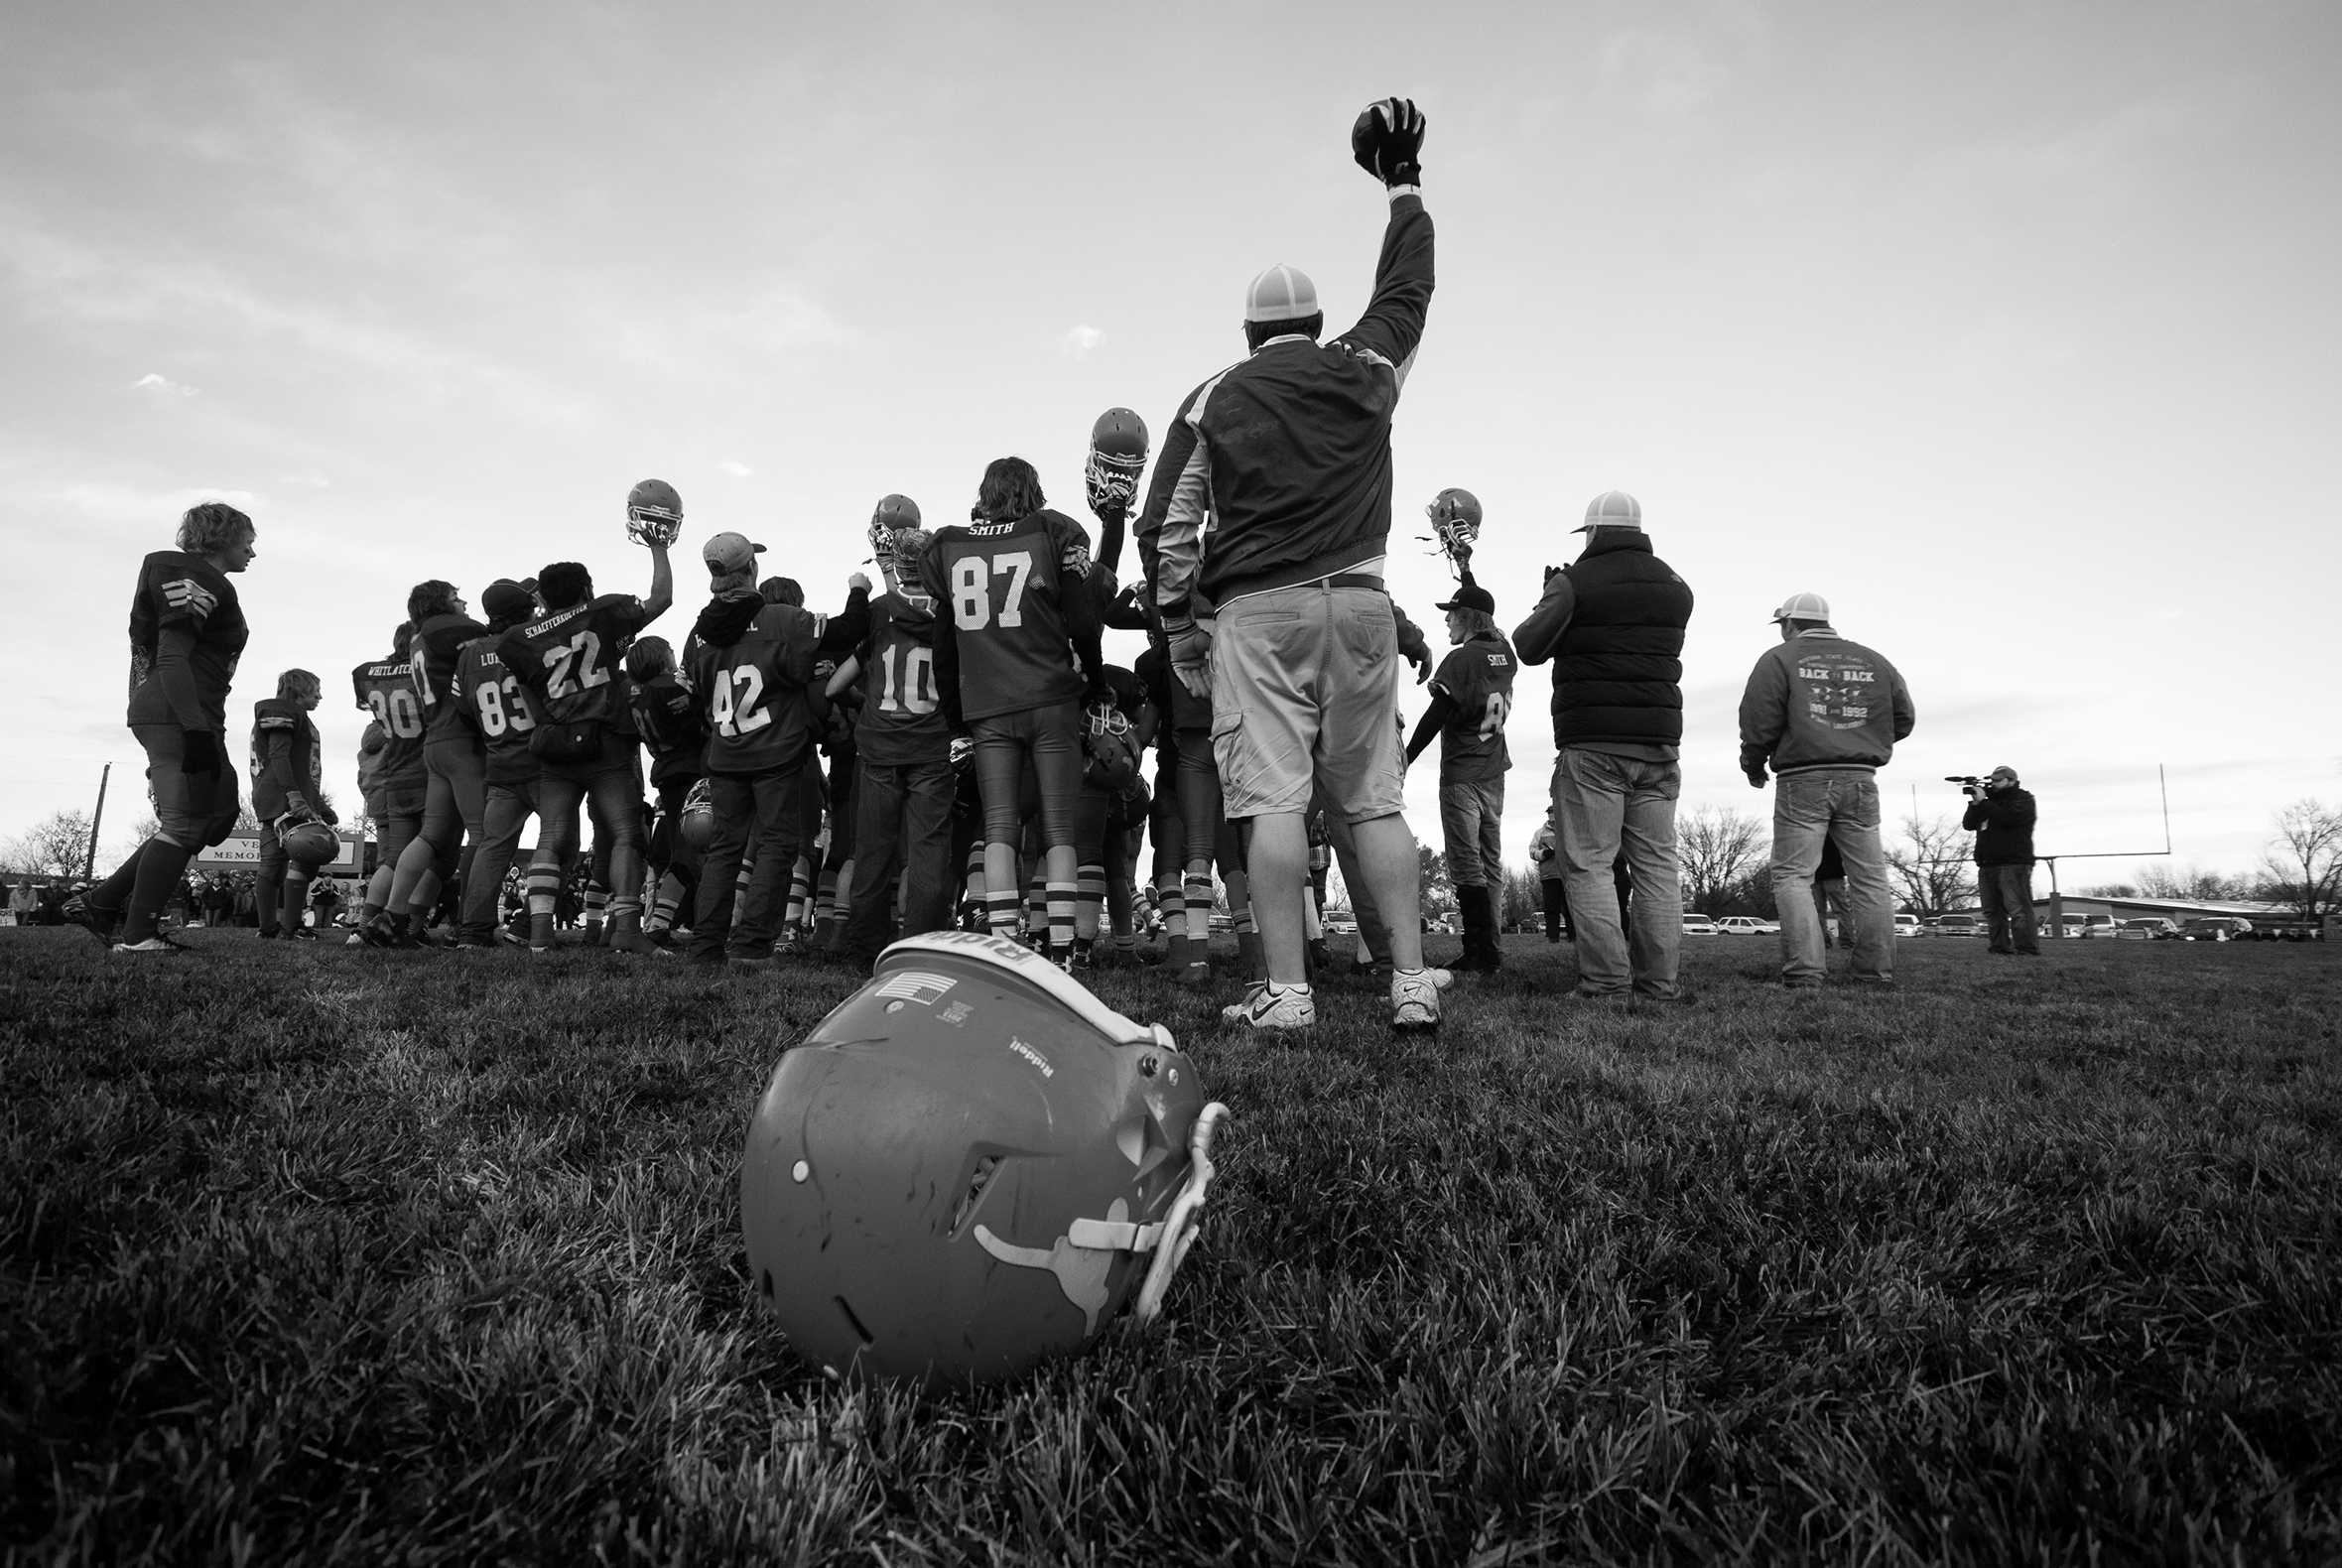 A school football team on the sideline of a field standing together with the coaches. One coach and several team members have an arm raised holding a football helmet in the air while a helmet rests on the grass in the foreground.